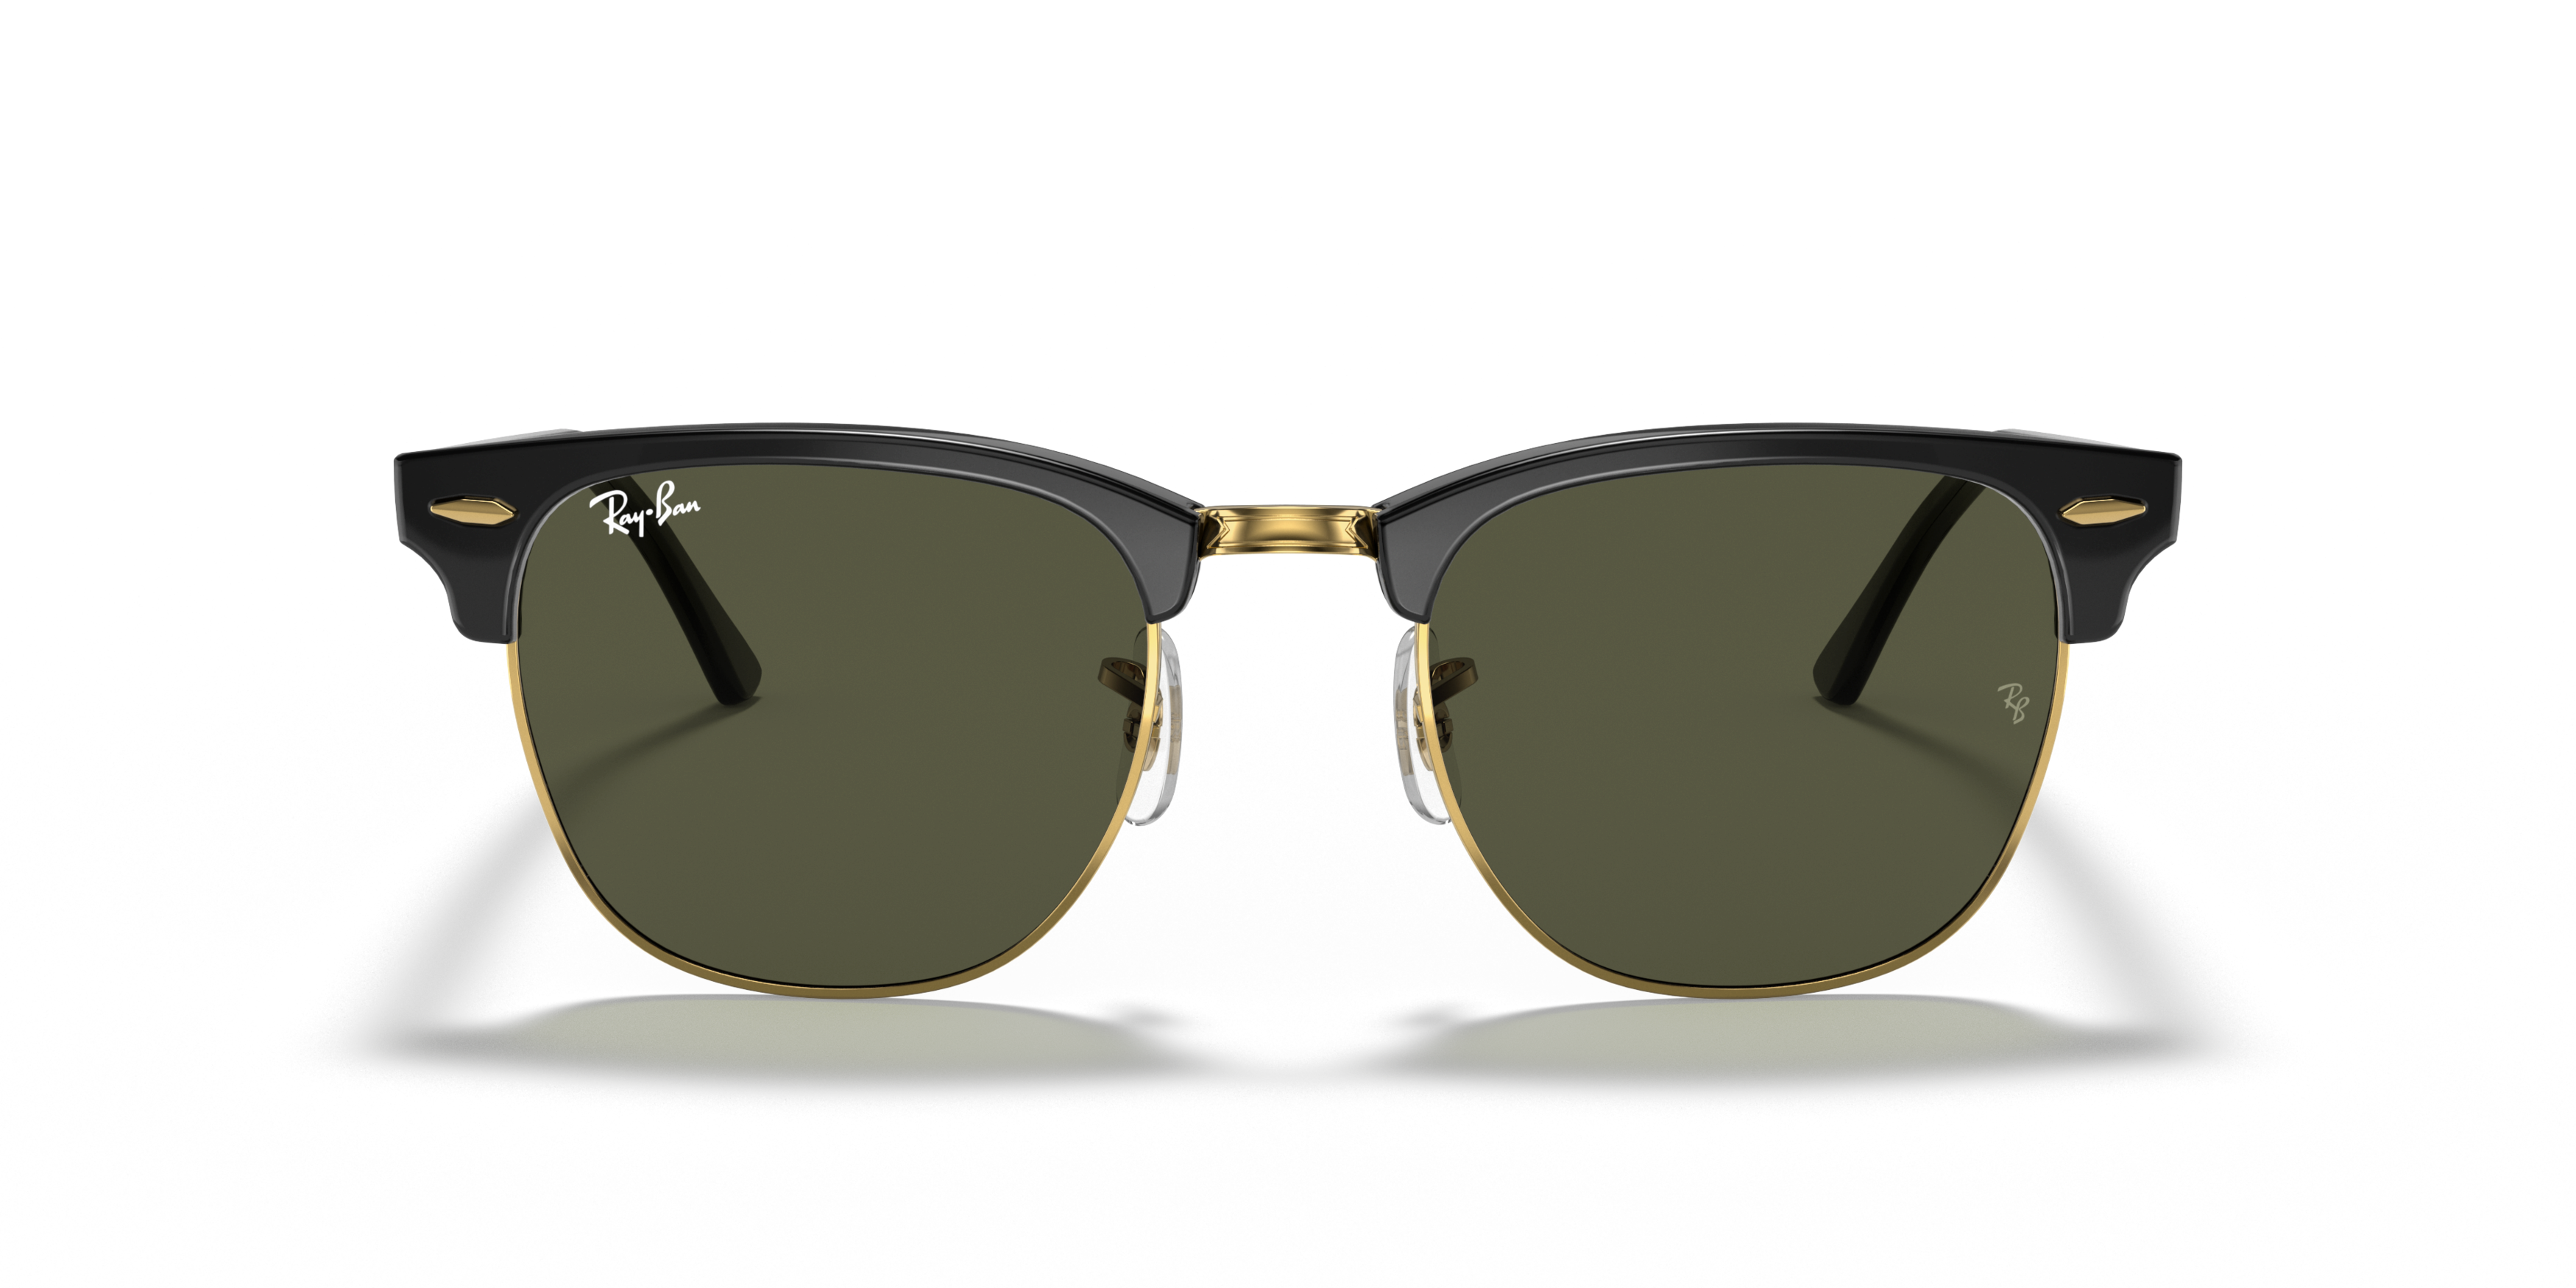 [products.image.front] Ray-Ban Clubmaster 0RB3016 W0365